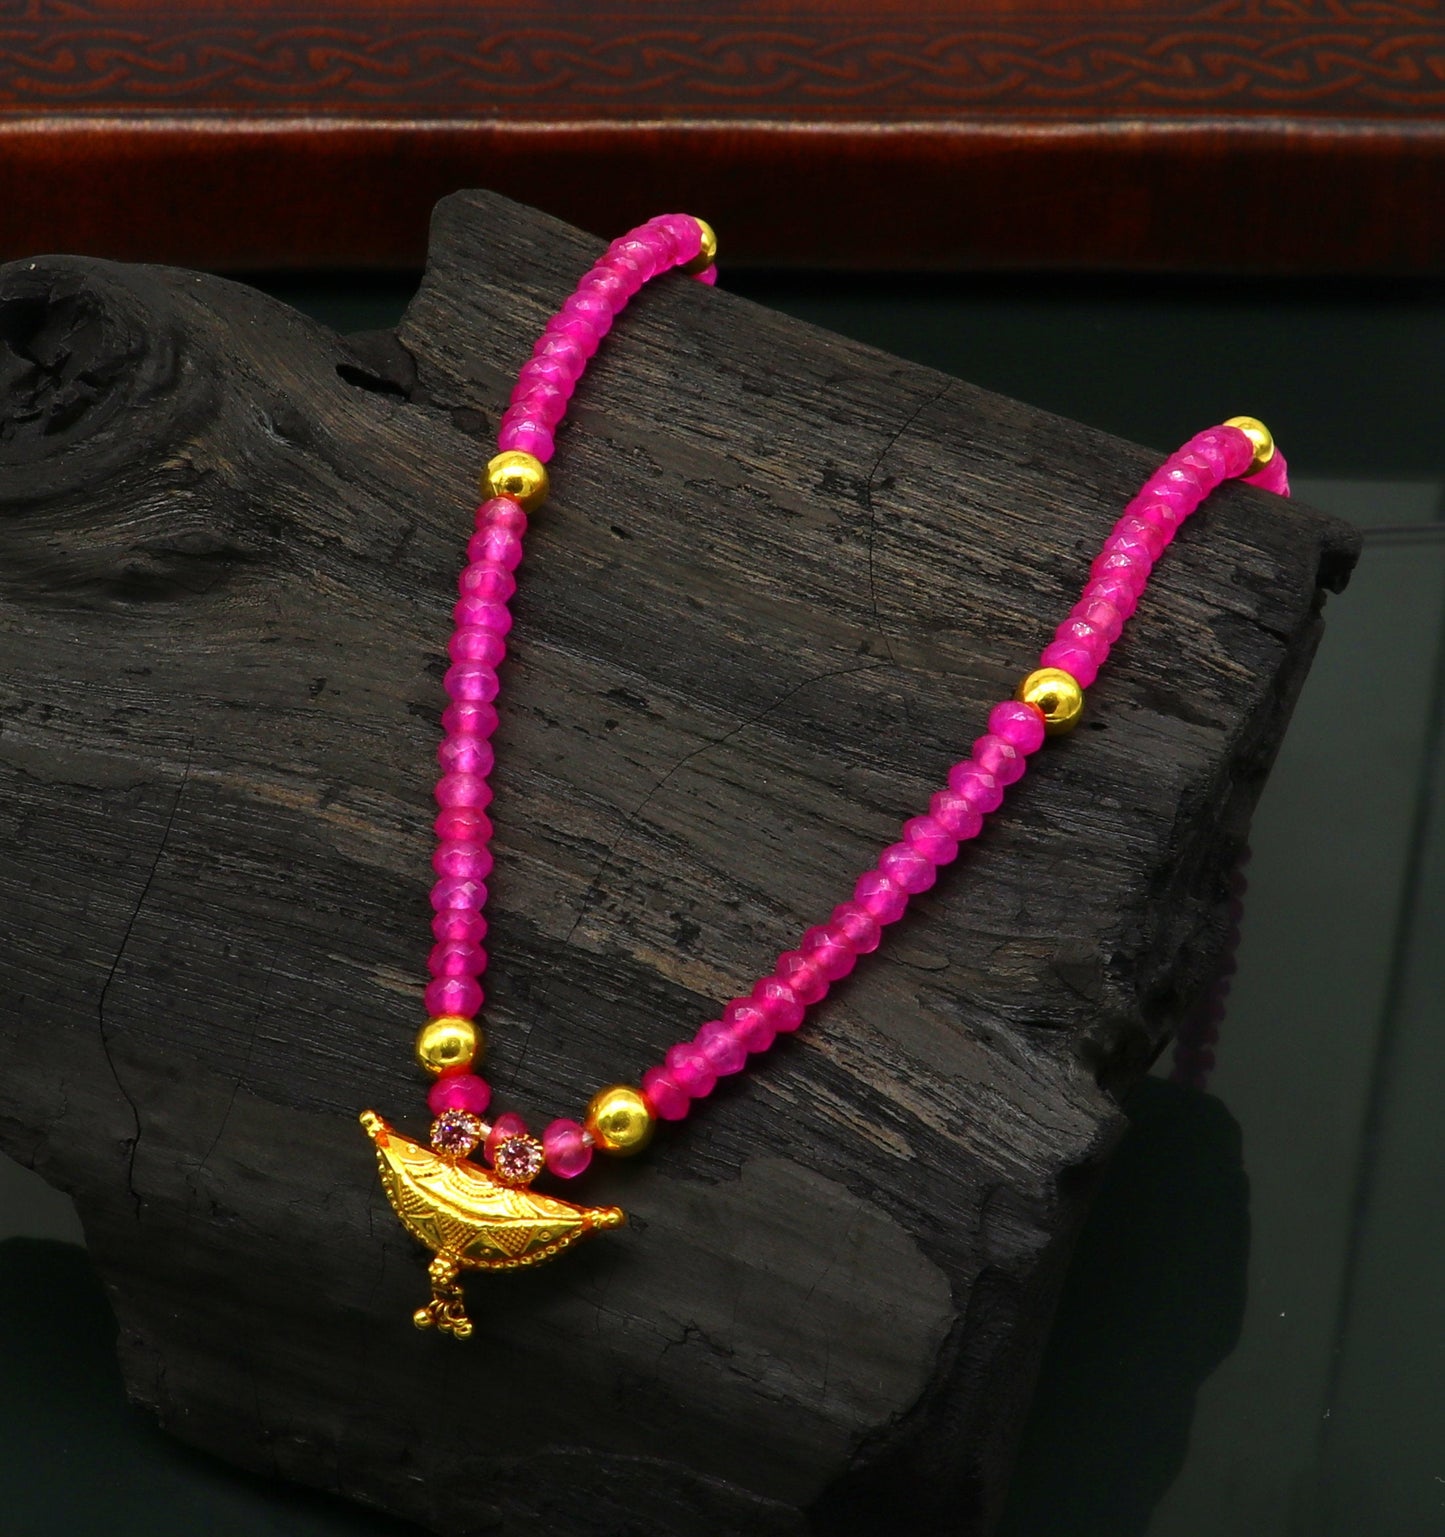 18" faceted pink color beaded necklace, 20kt yellow gold amulet stylish pendant, vintage customized brides gift tribal ethnic jewelry ap08 - TRIBAL ORNAMENTS